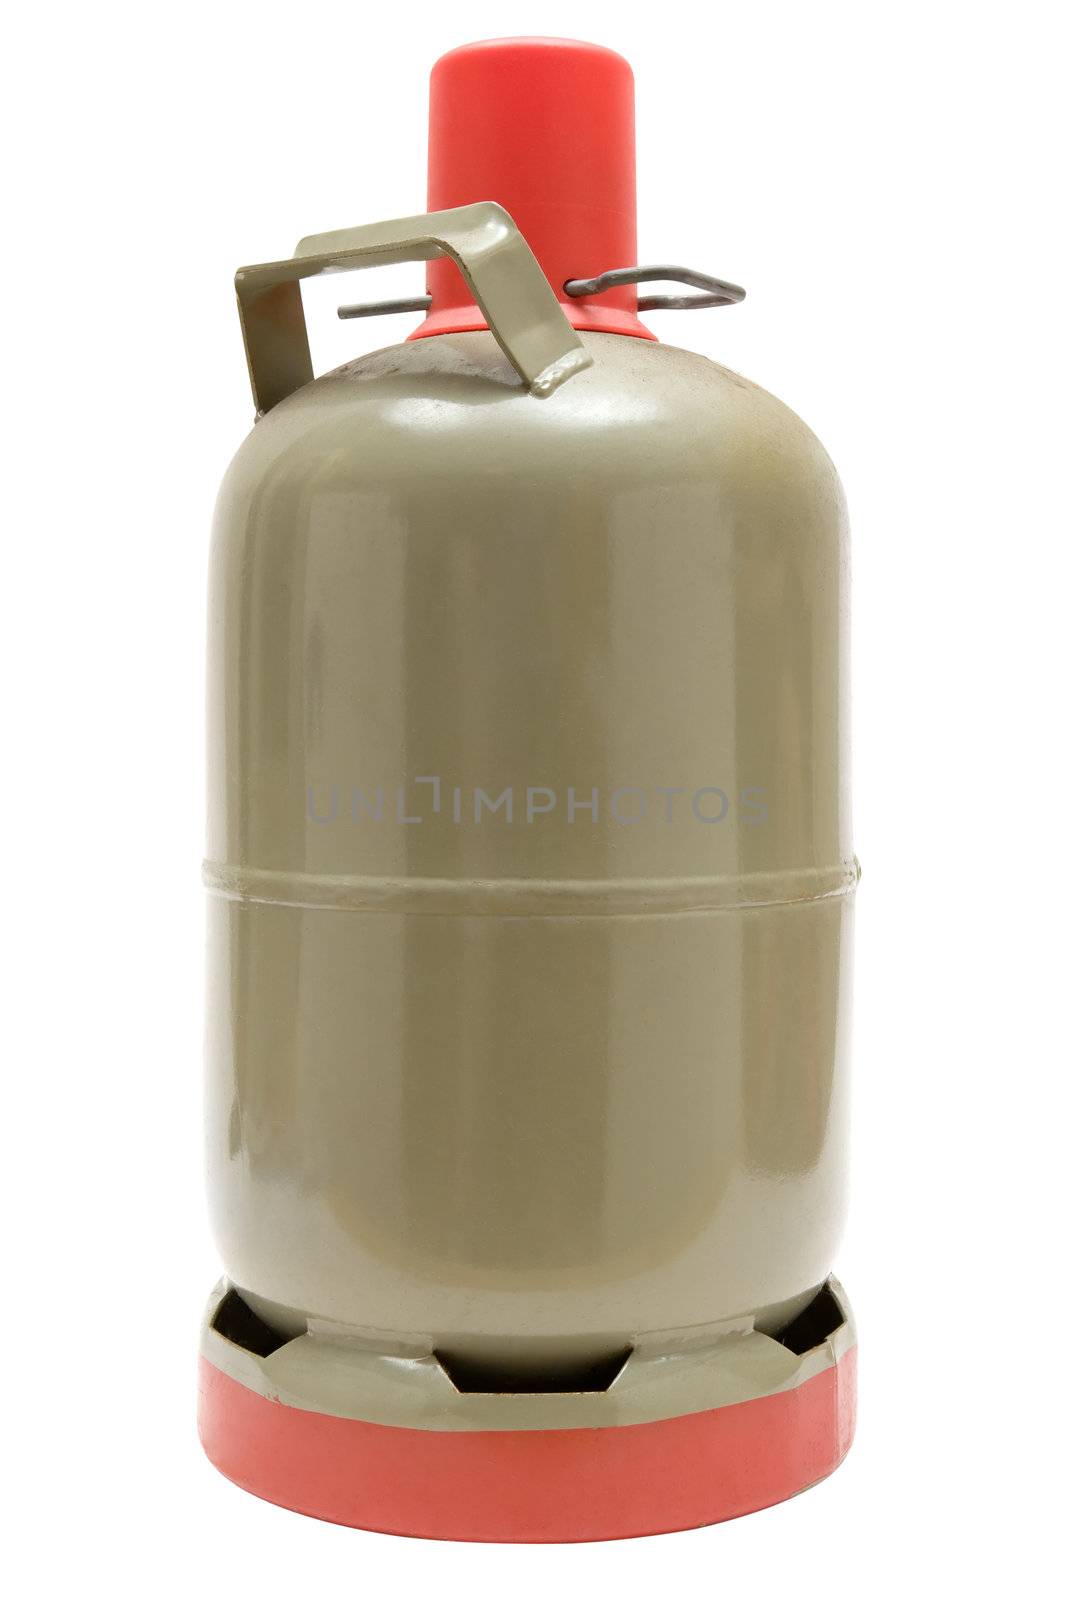 Metal gas cylinder isolated on a white background.